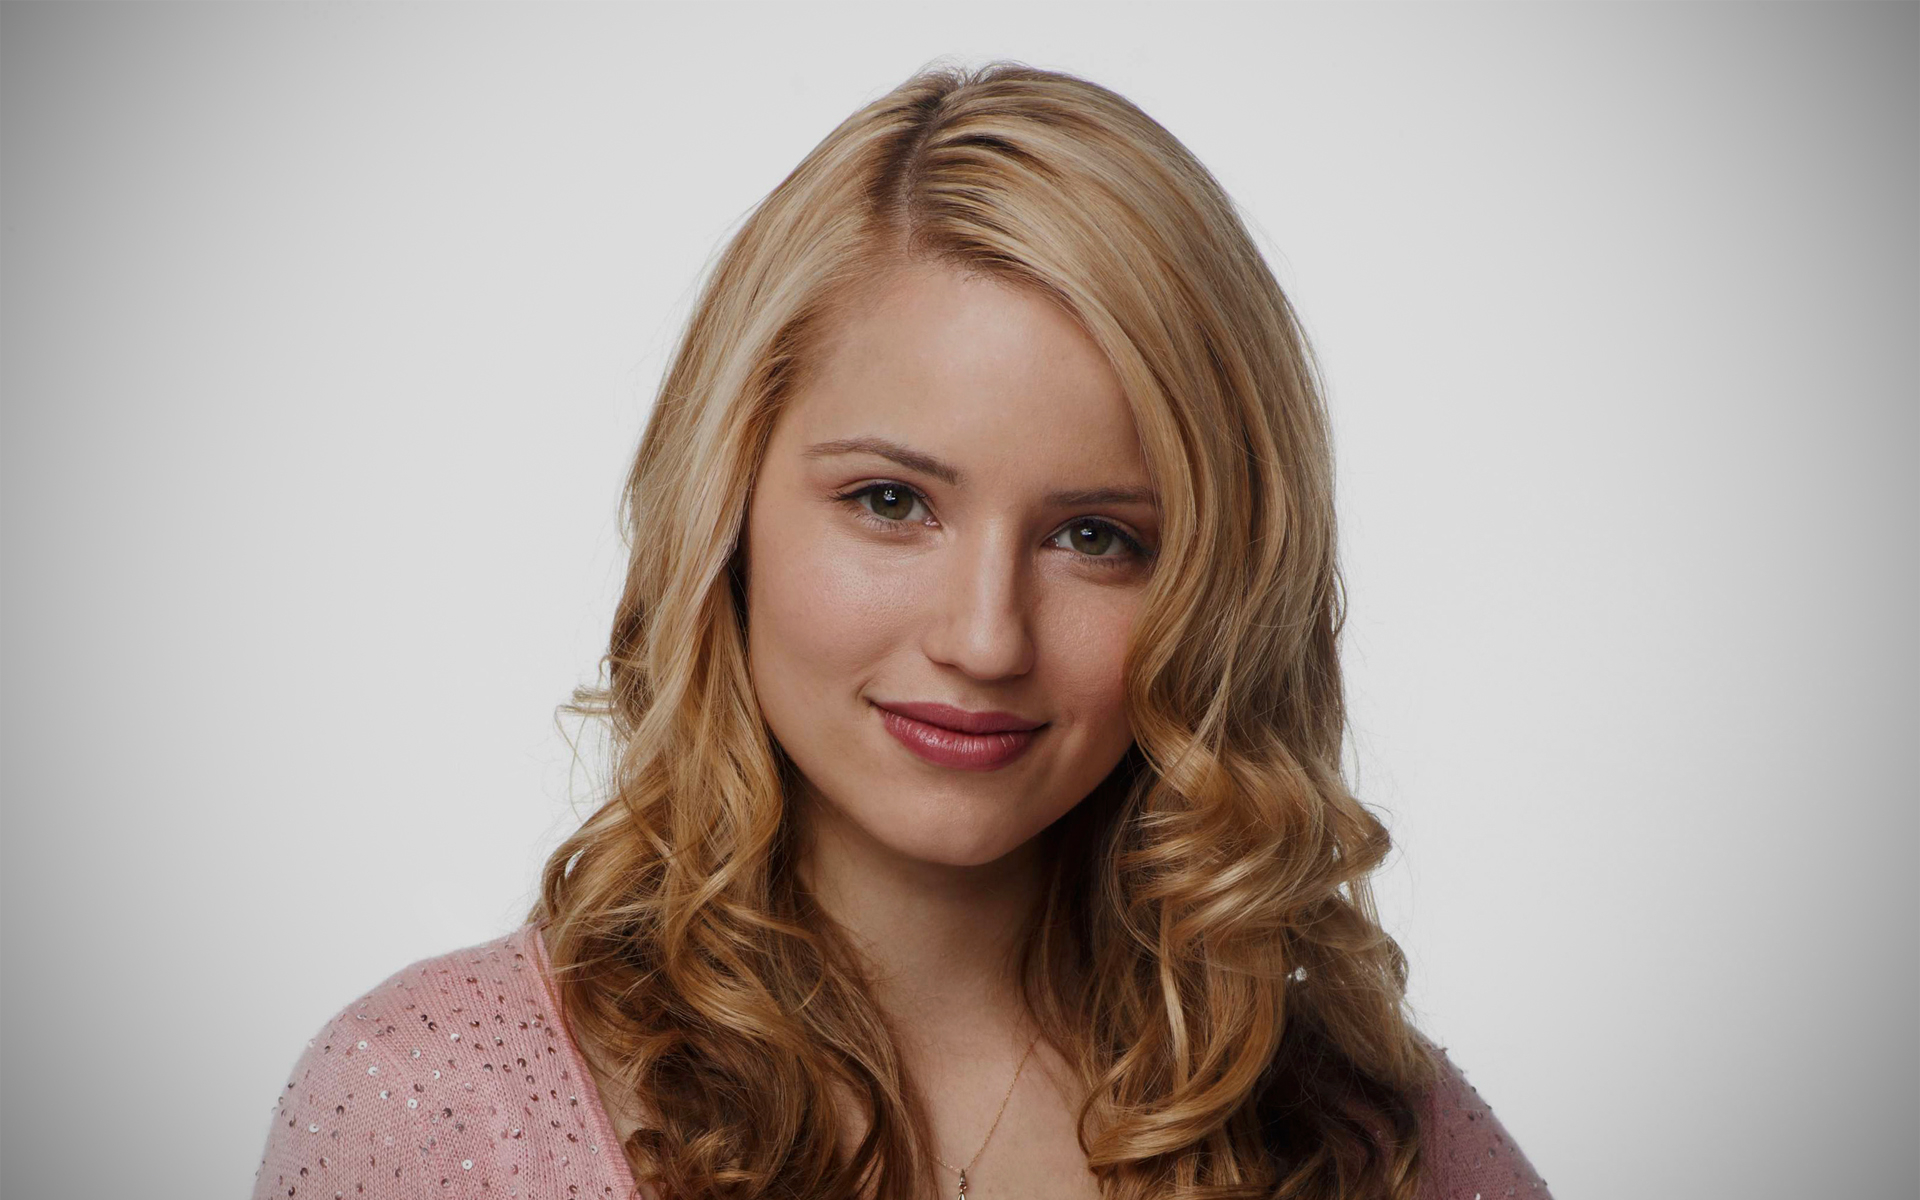 celebrity, dianna agron, actress, american